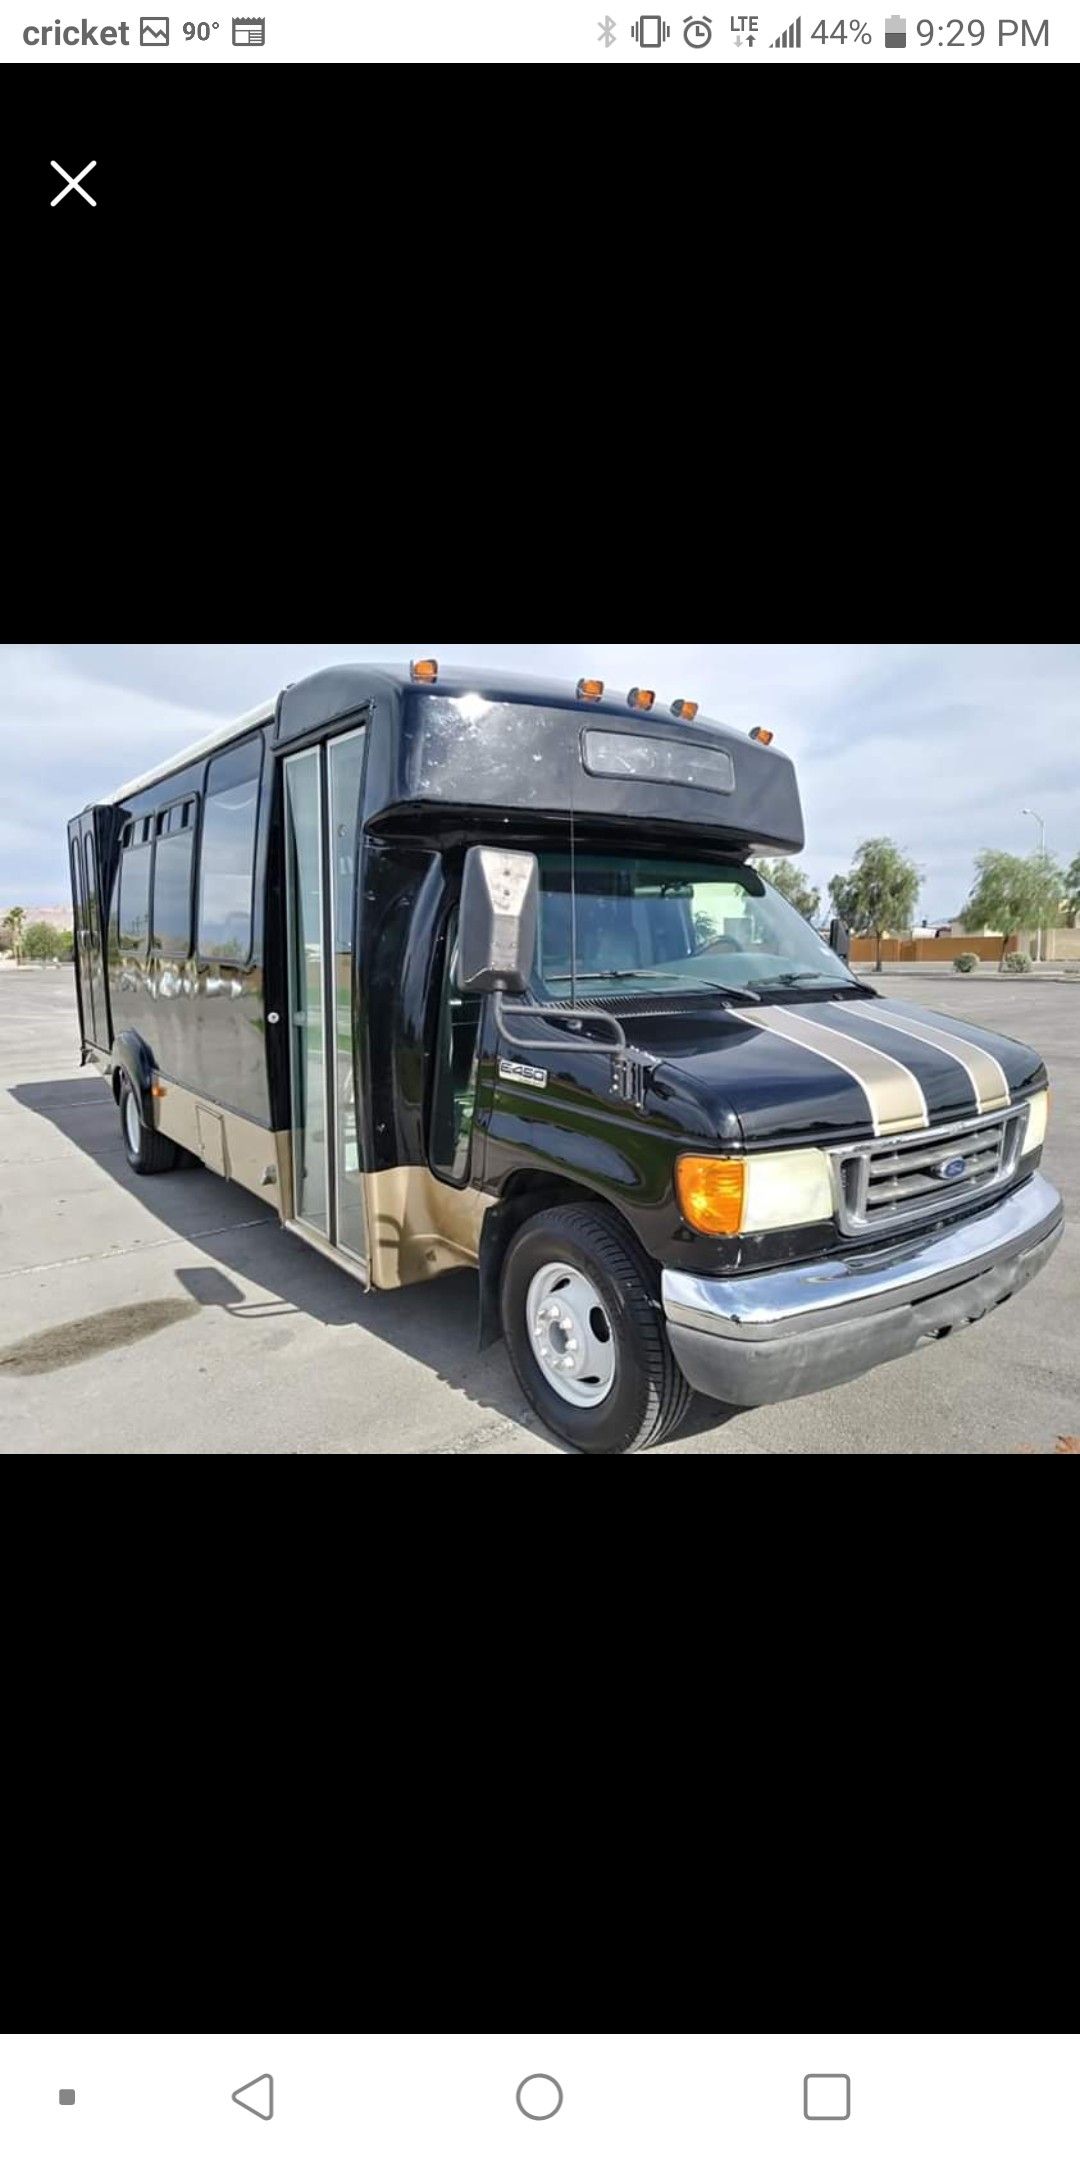 2007 FORD F450 DIESEL SHUTTLE BUS ***THE PRICE IS NEGOCIABLE IN PERSON ONLY***